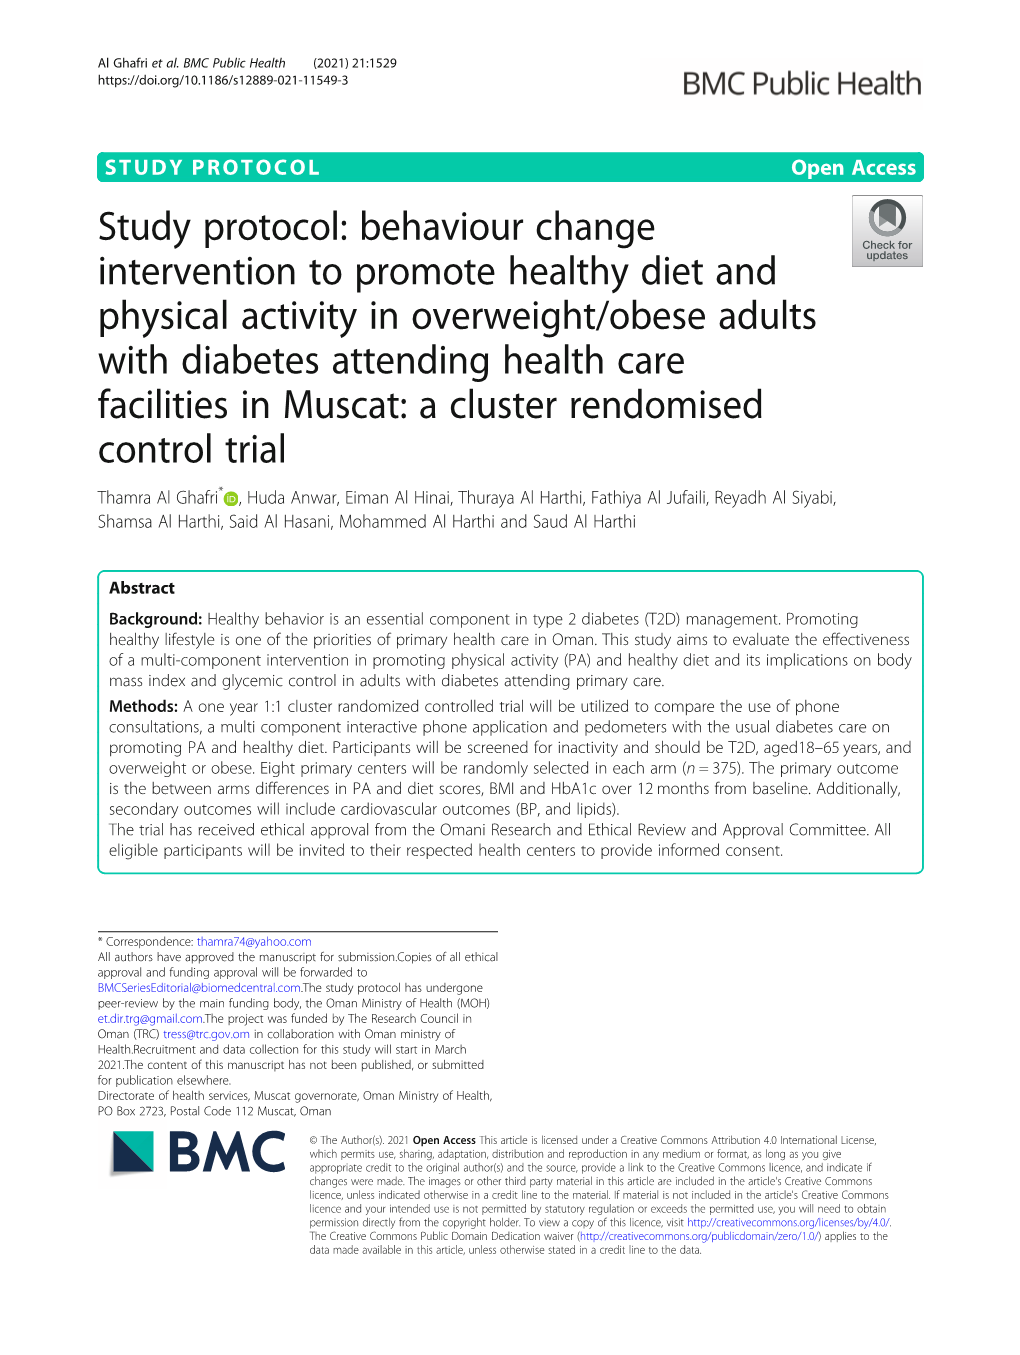 Behaviour Change Intervention to Promote Healthy Diet and Physical